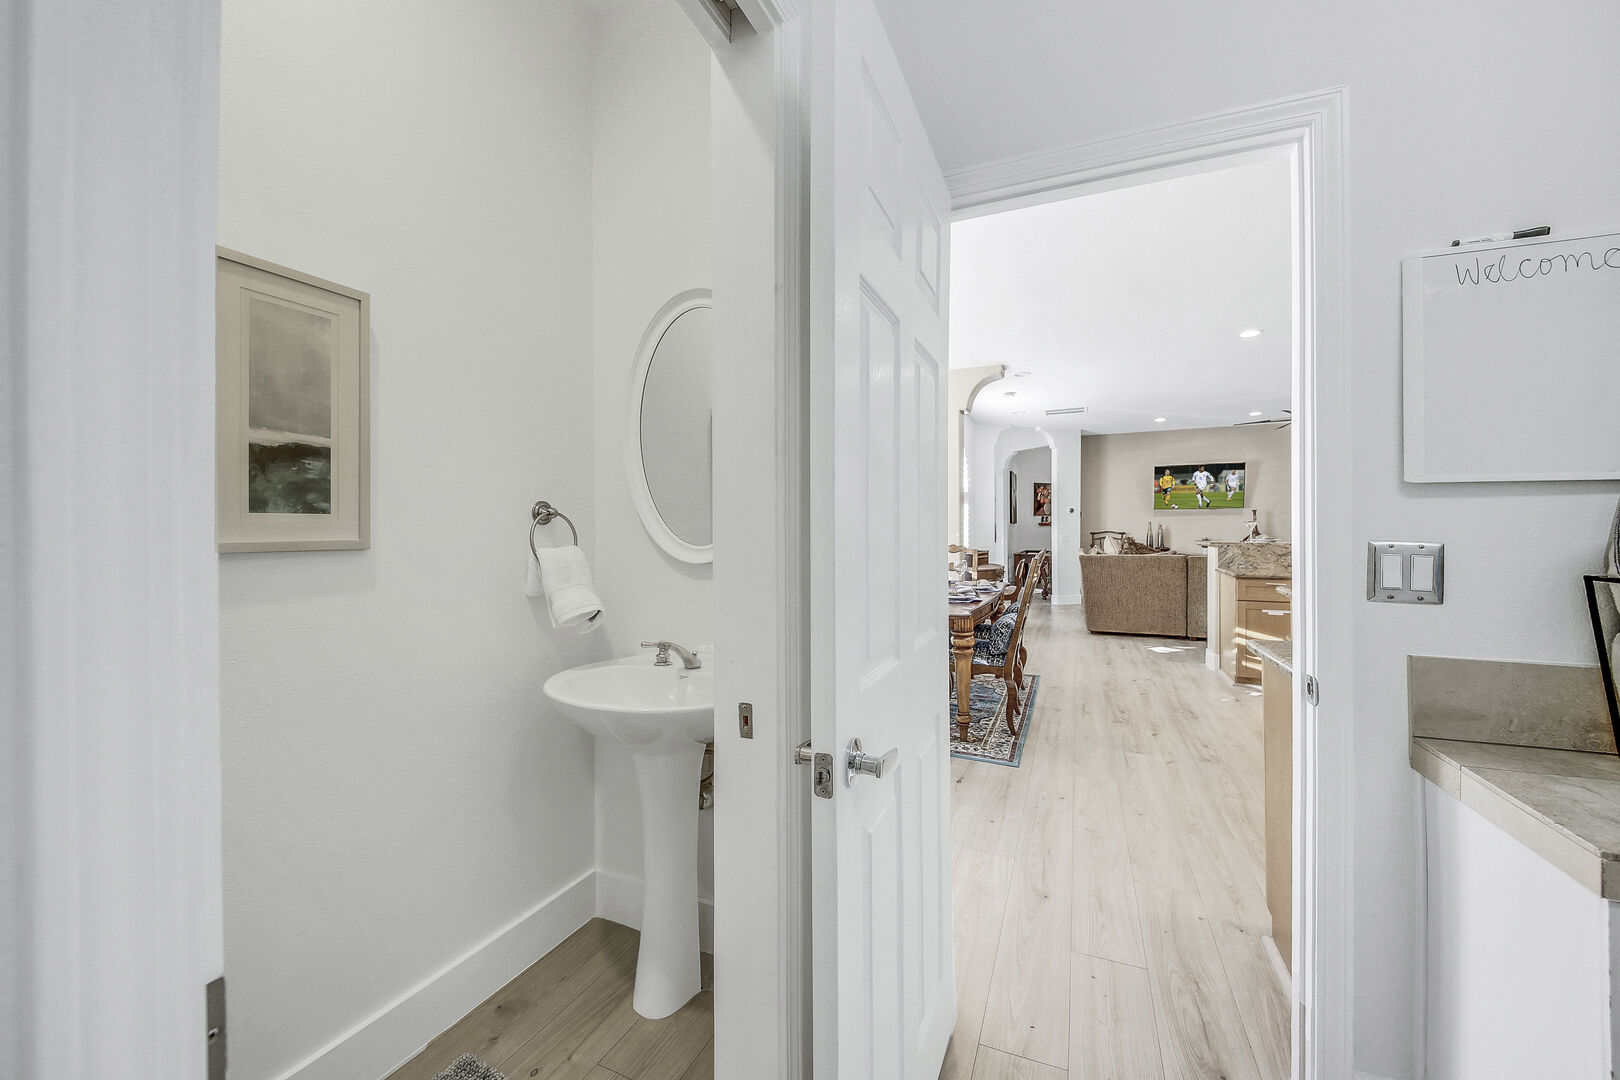 The hallway powder room is located inside the Laundry room and features a pedestal sink.